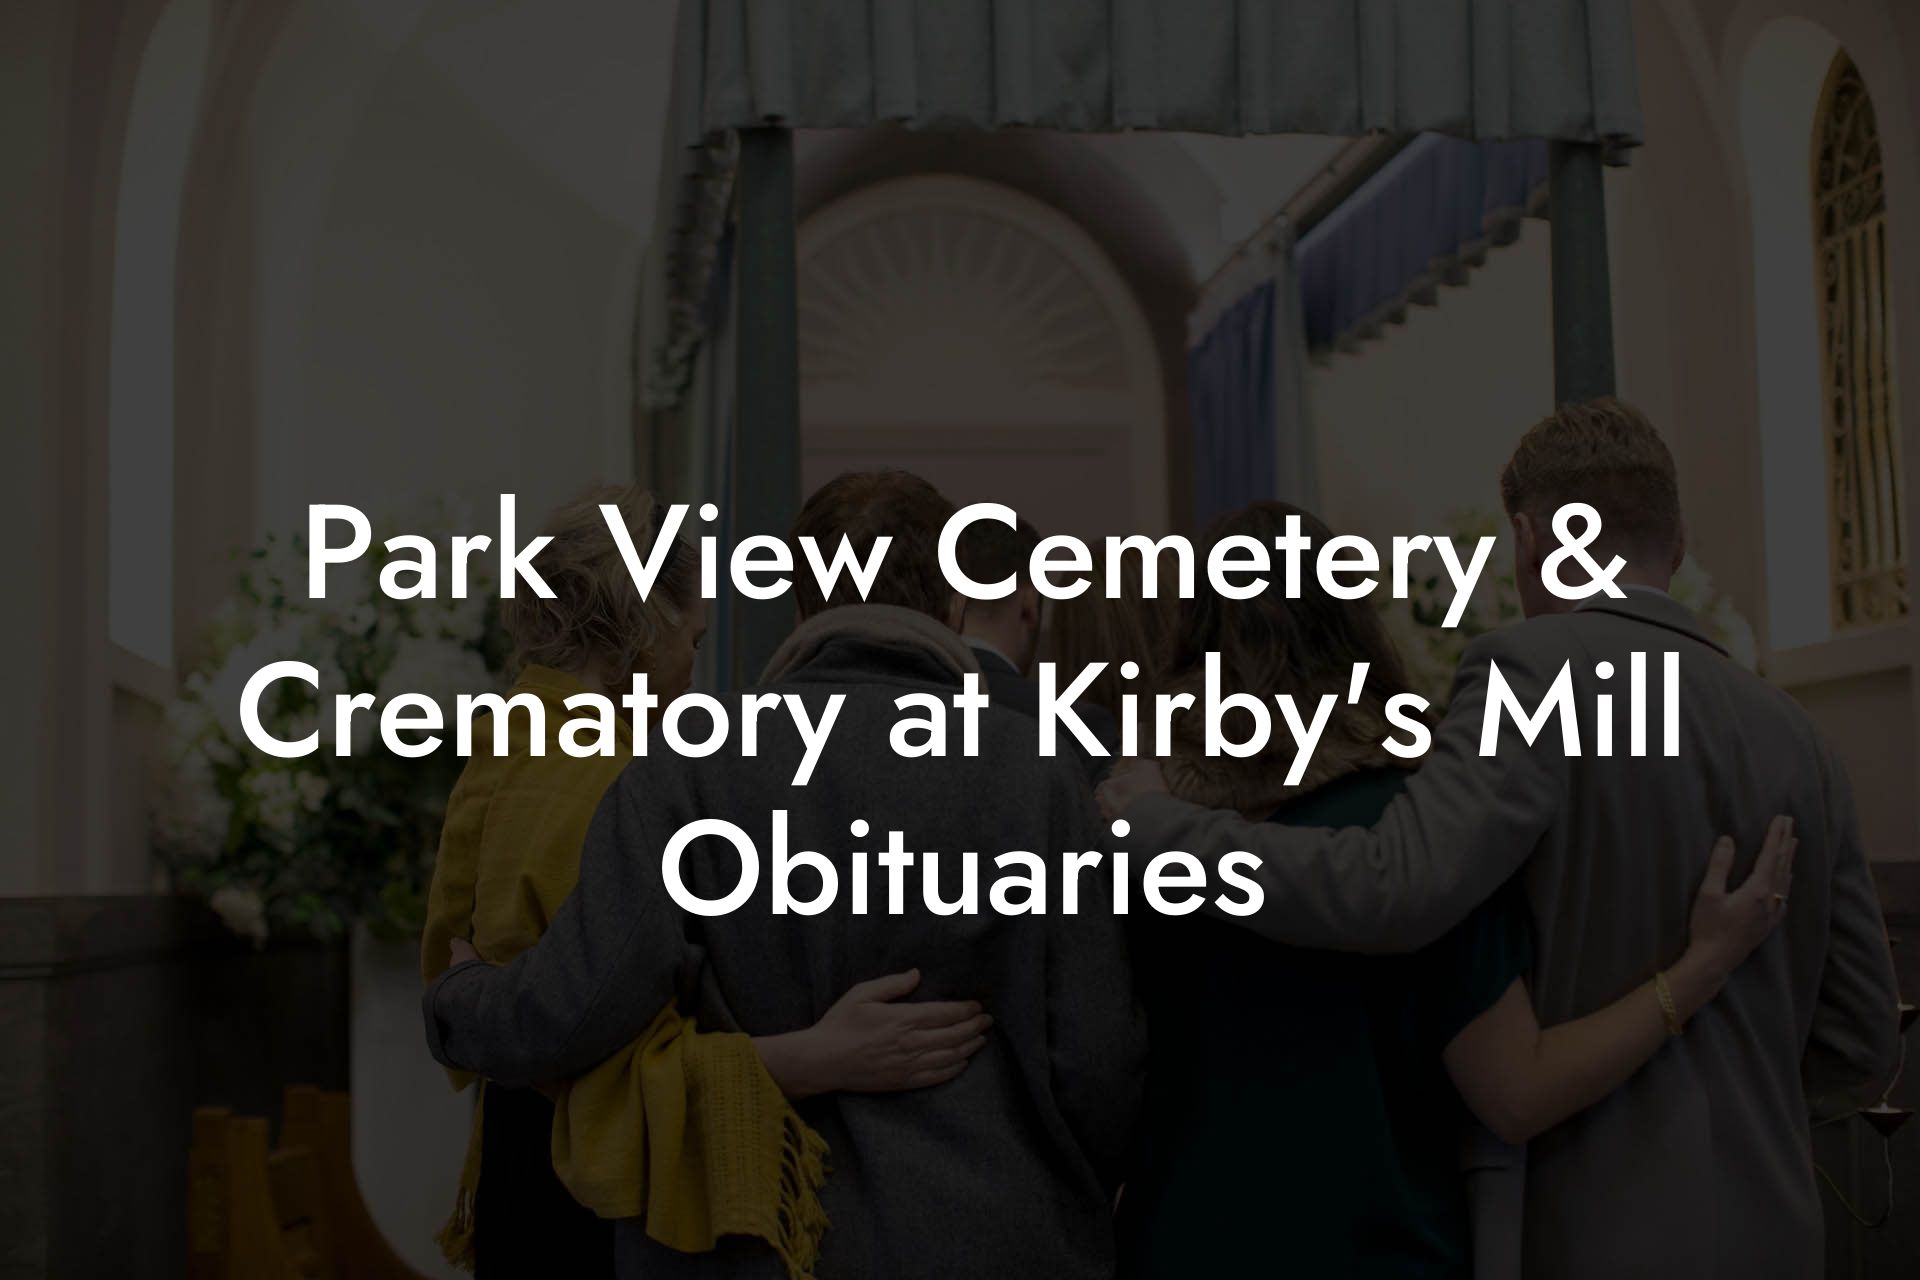 Park View Cemetery & Crematory at Kirby's Mill Obituaries